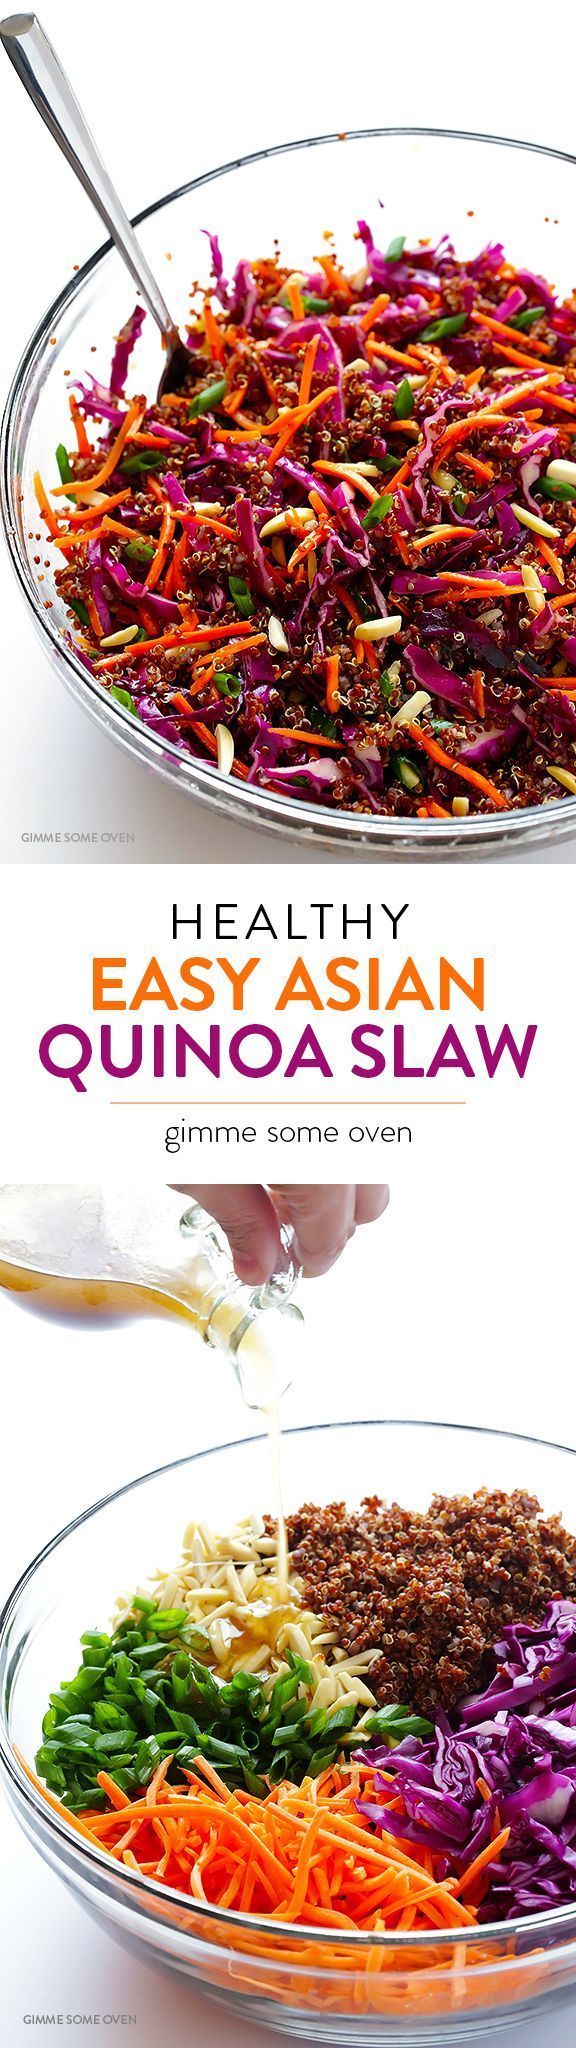 Easy Asian Quinoa Salad — quick and easy to make, full of great flavor, and naturally vegan and gluten-free!